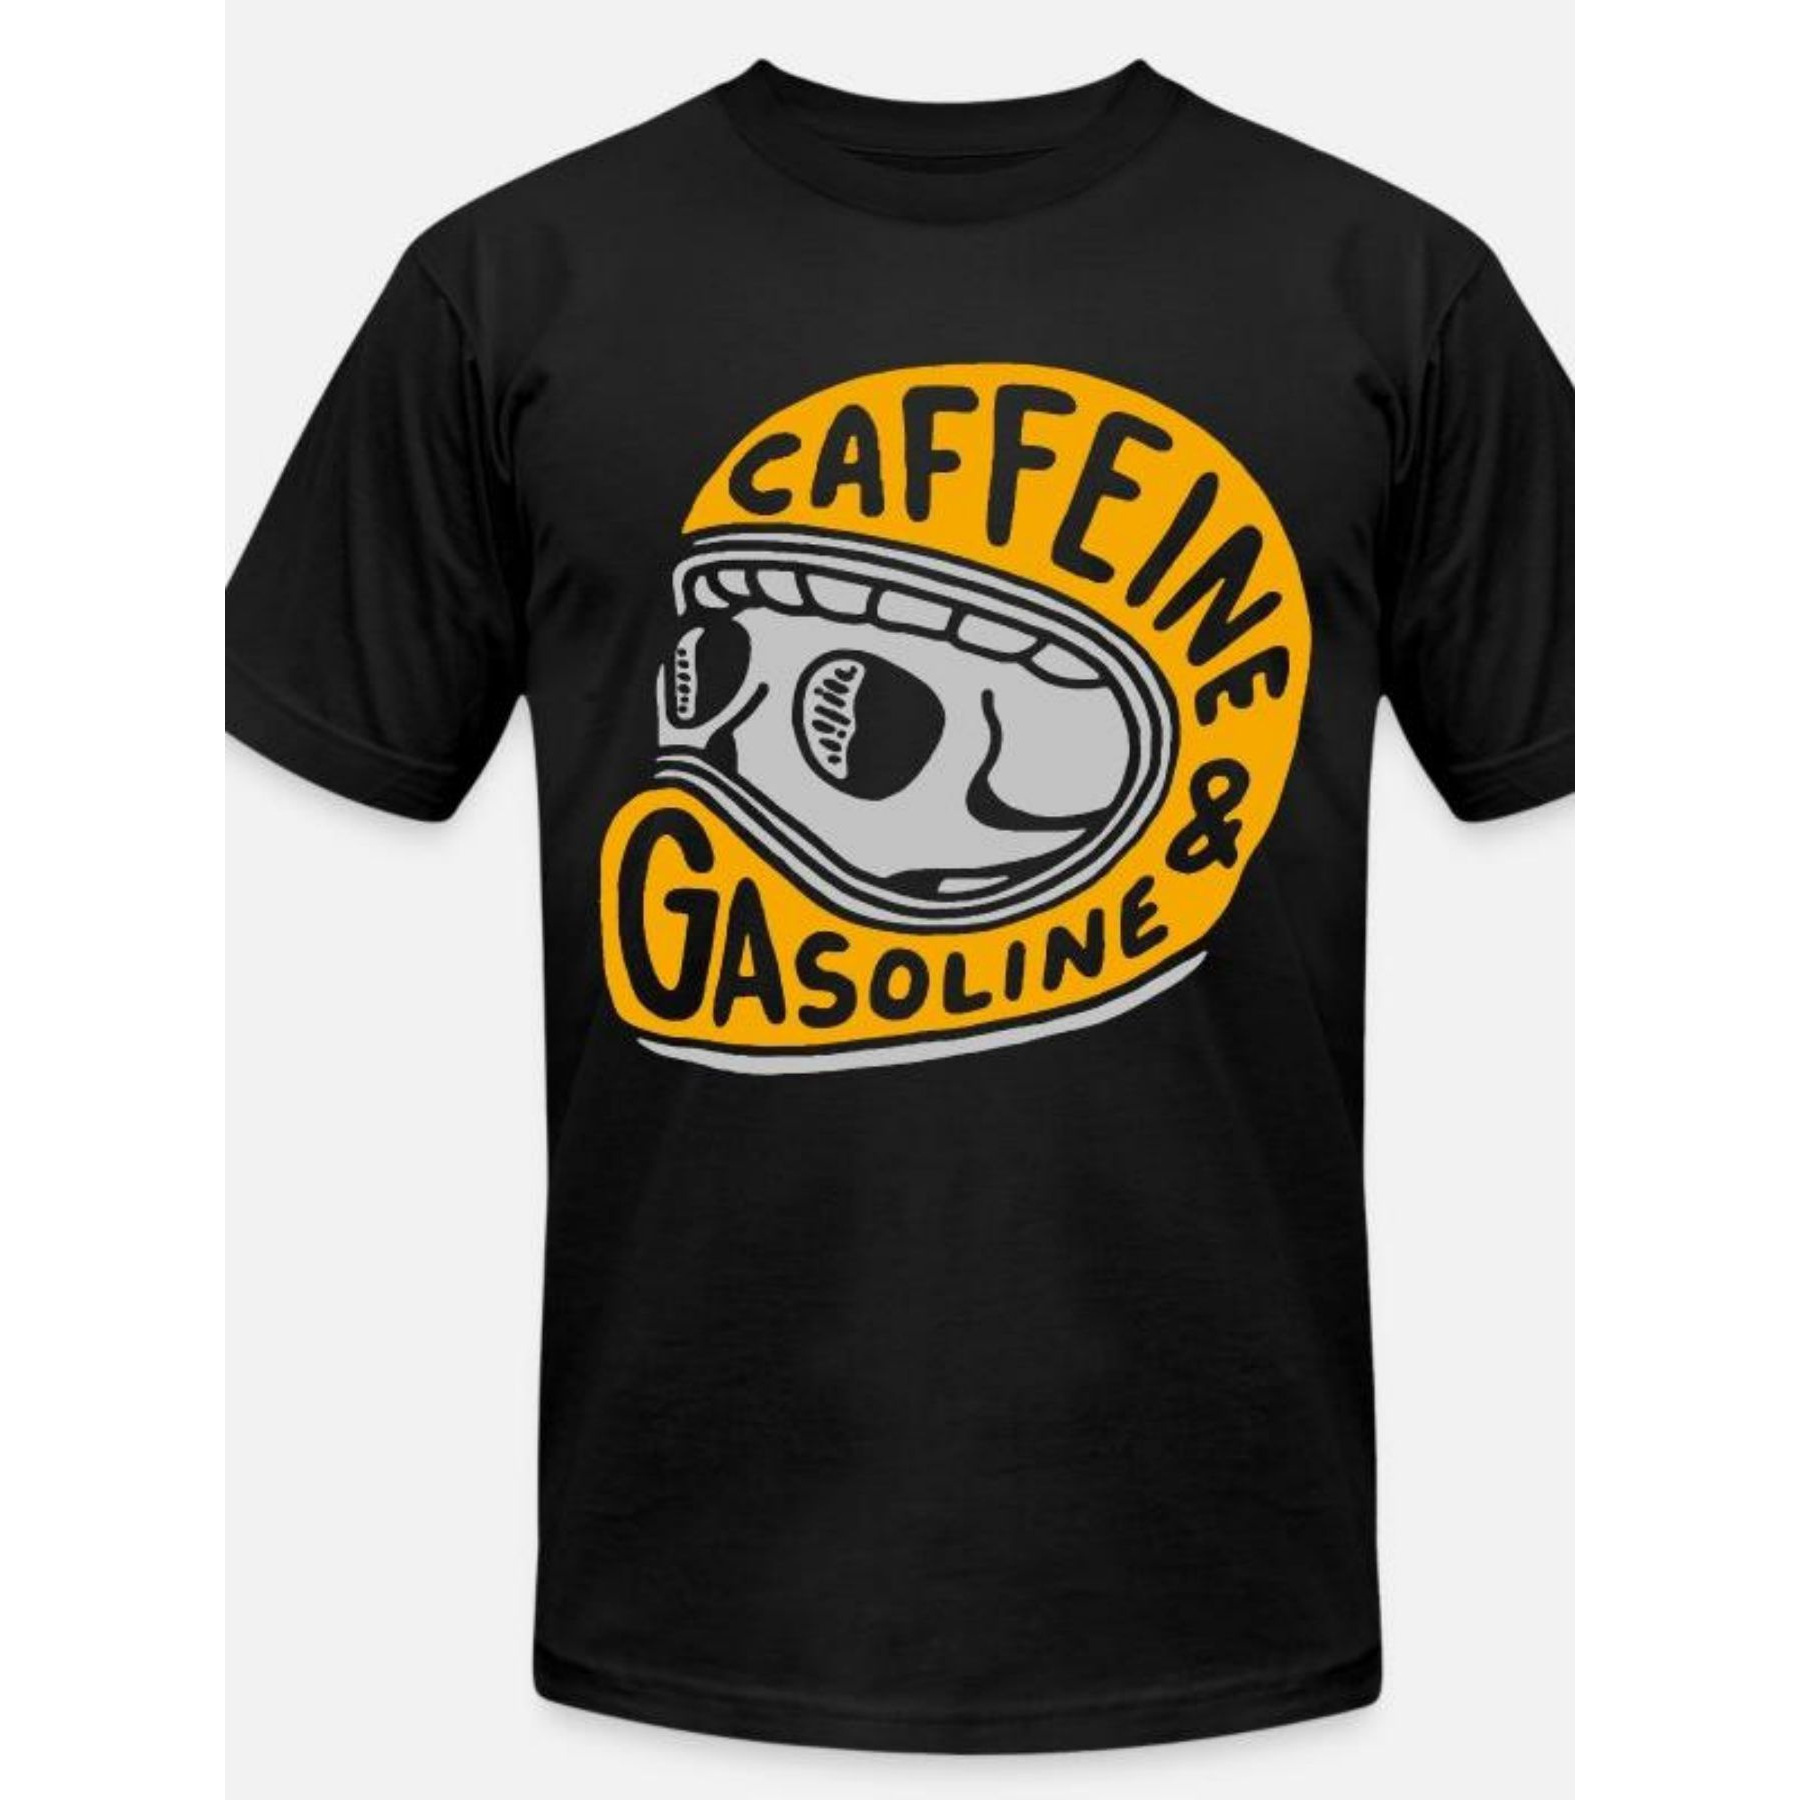 

Caffeine And Gasoline Funny Men's Short Sleeve Graphic T-shirt Collection Black